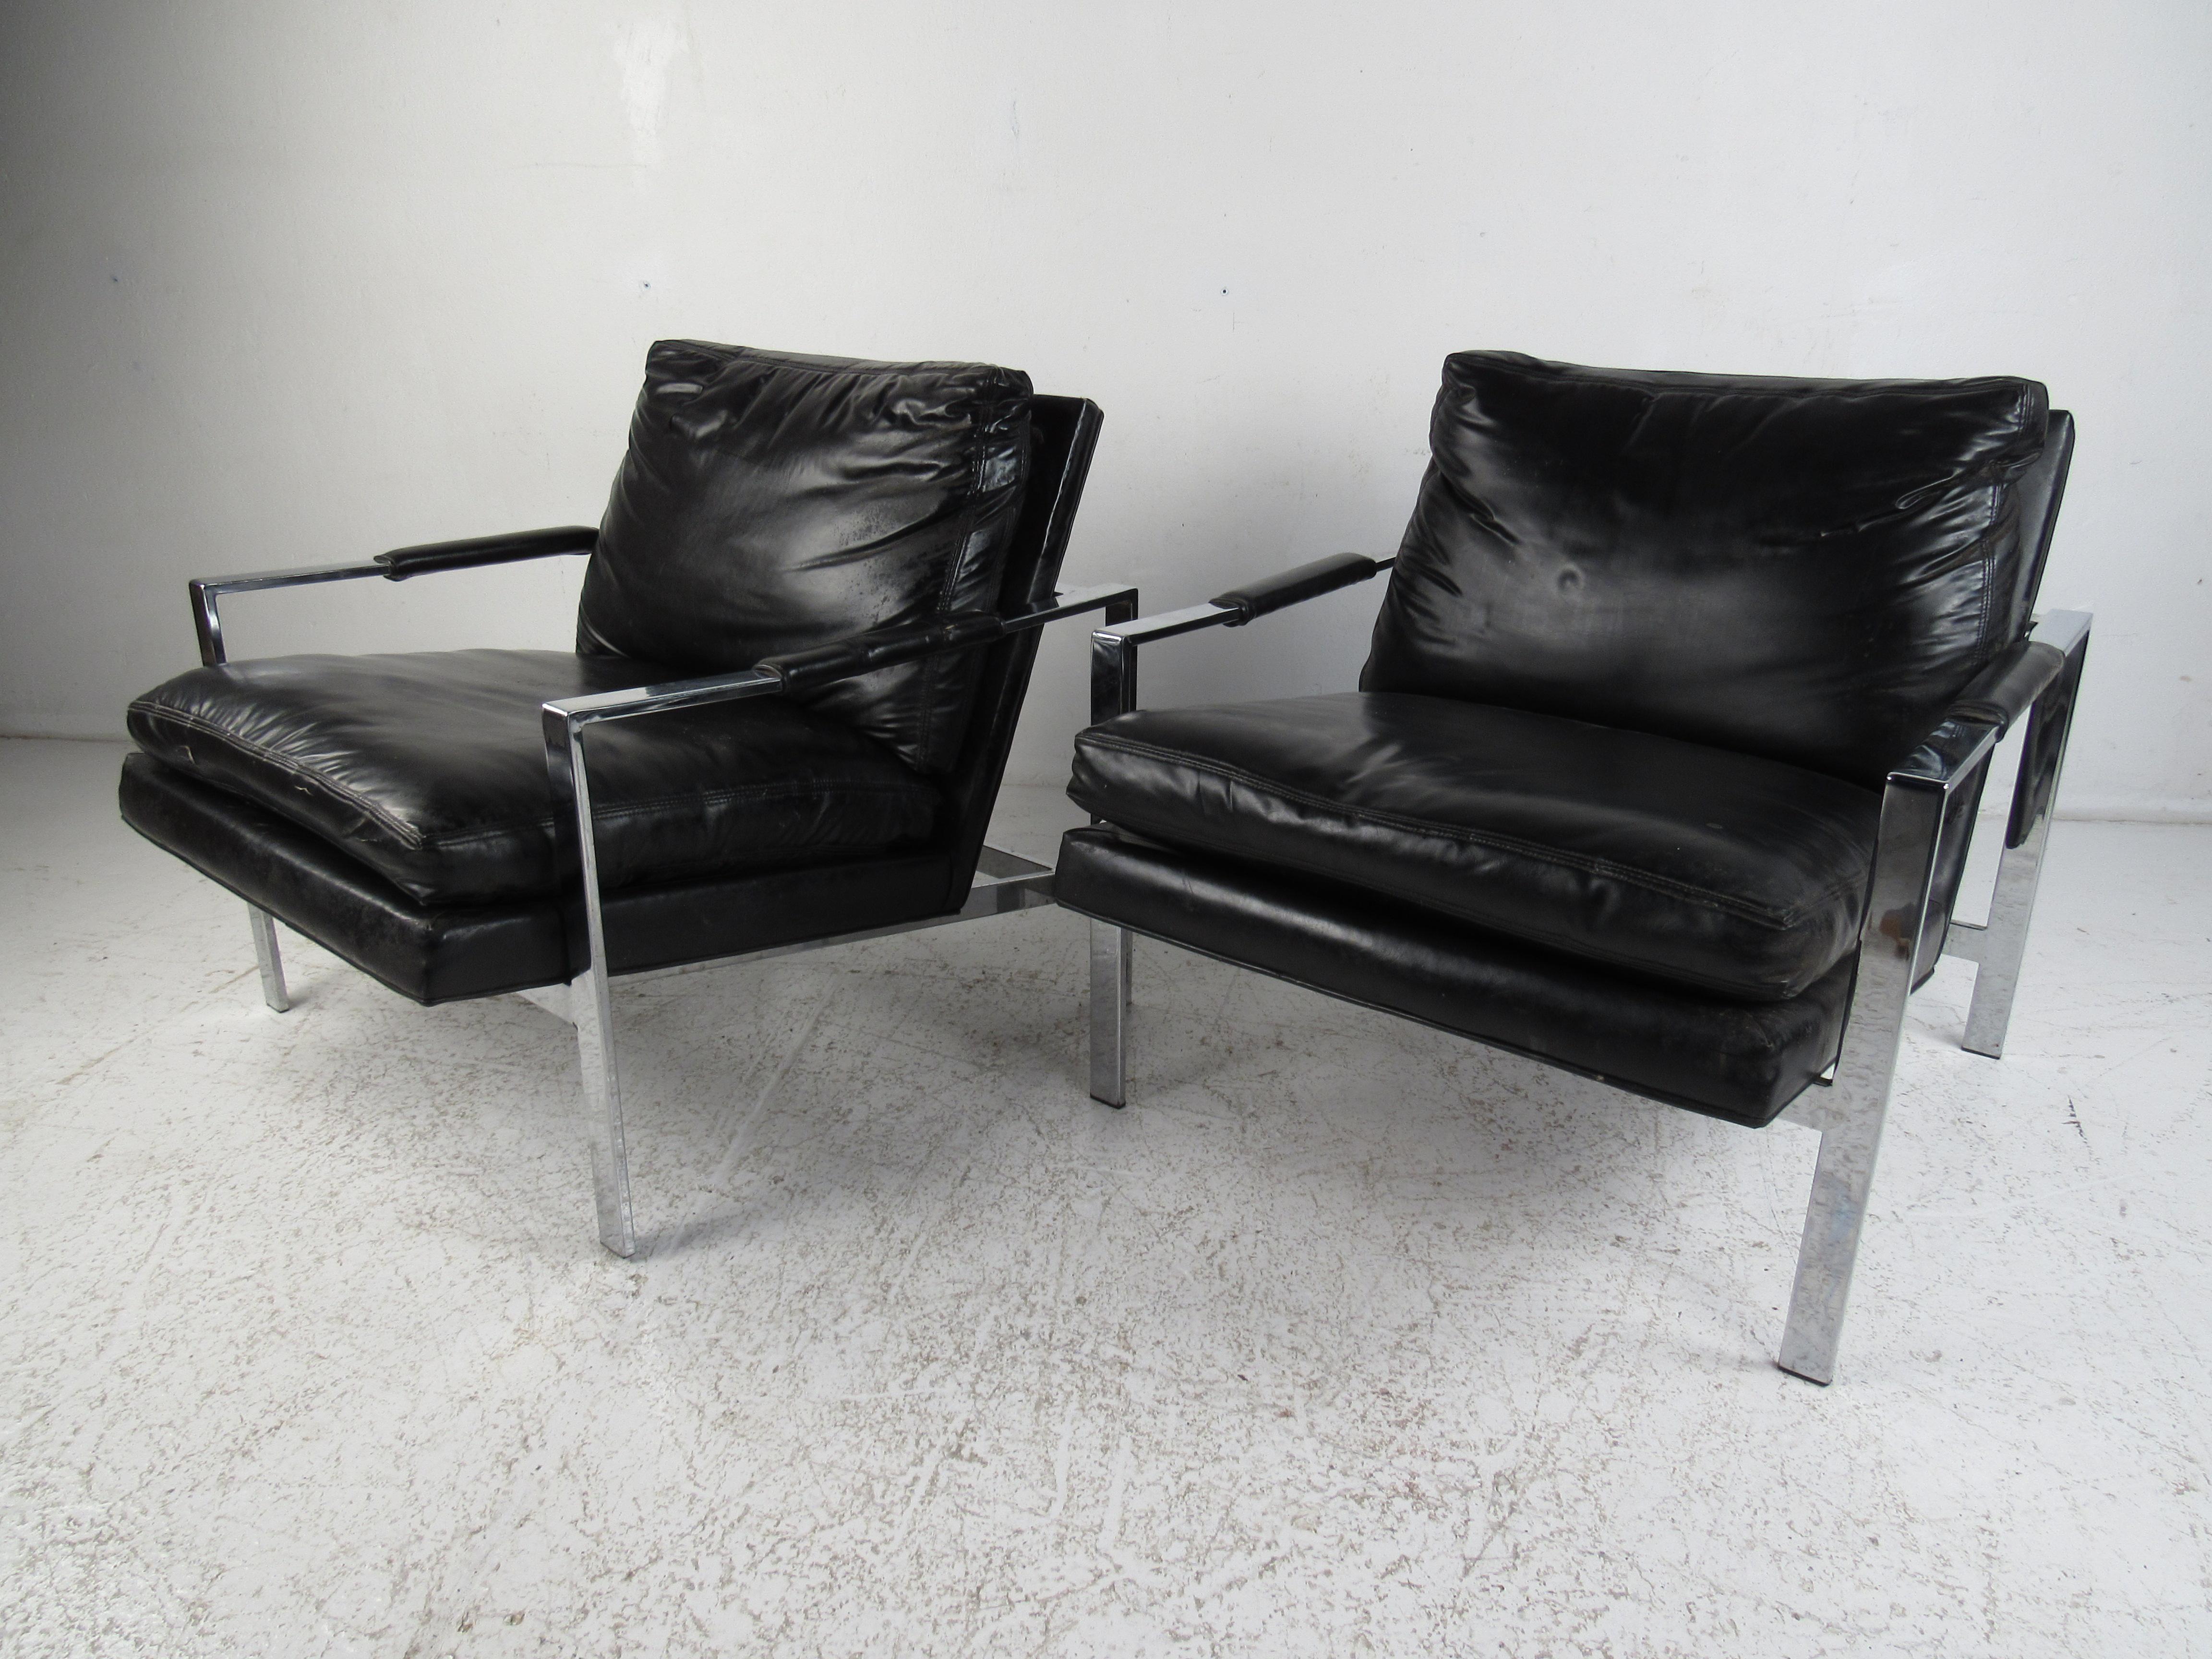 This stunning pair of Mid-Century Modern lounge chairs feature a flat bar chrome frame with overstuffed seating covered in black vinyl. An iconic design by Milo Baughman with the original tag underneath. This sleek and comfortable pair of lounge